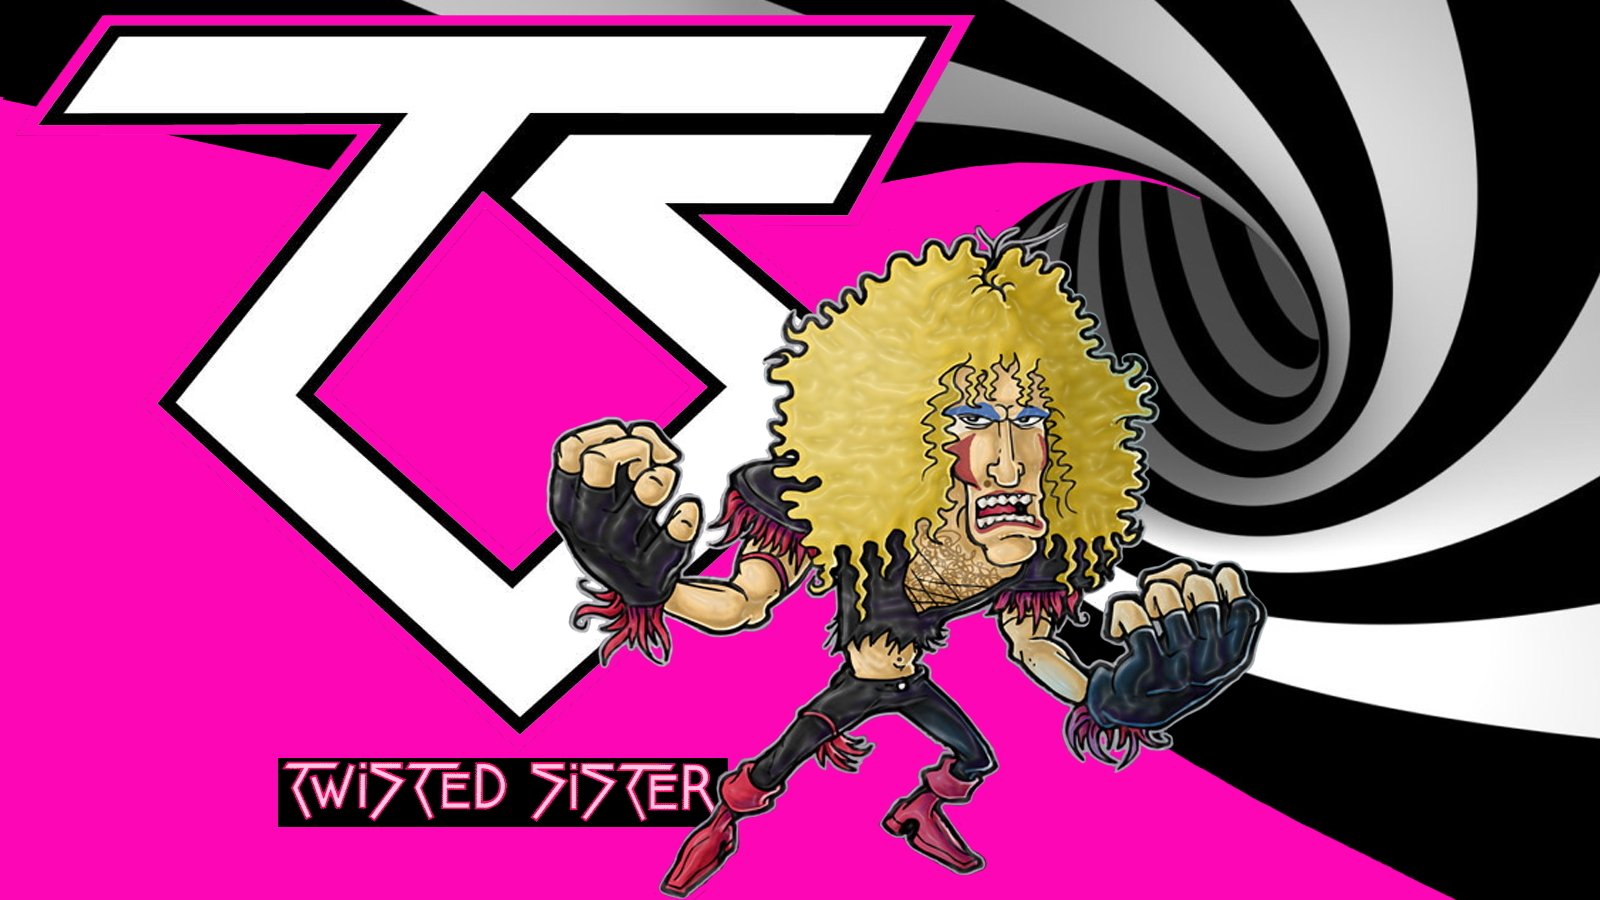 10 Twisted Sister HD Wallpapers and Backgrounds